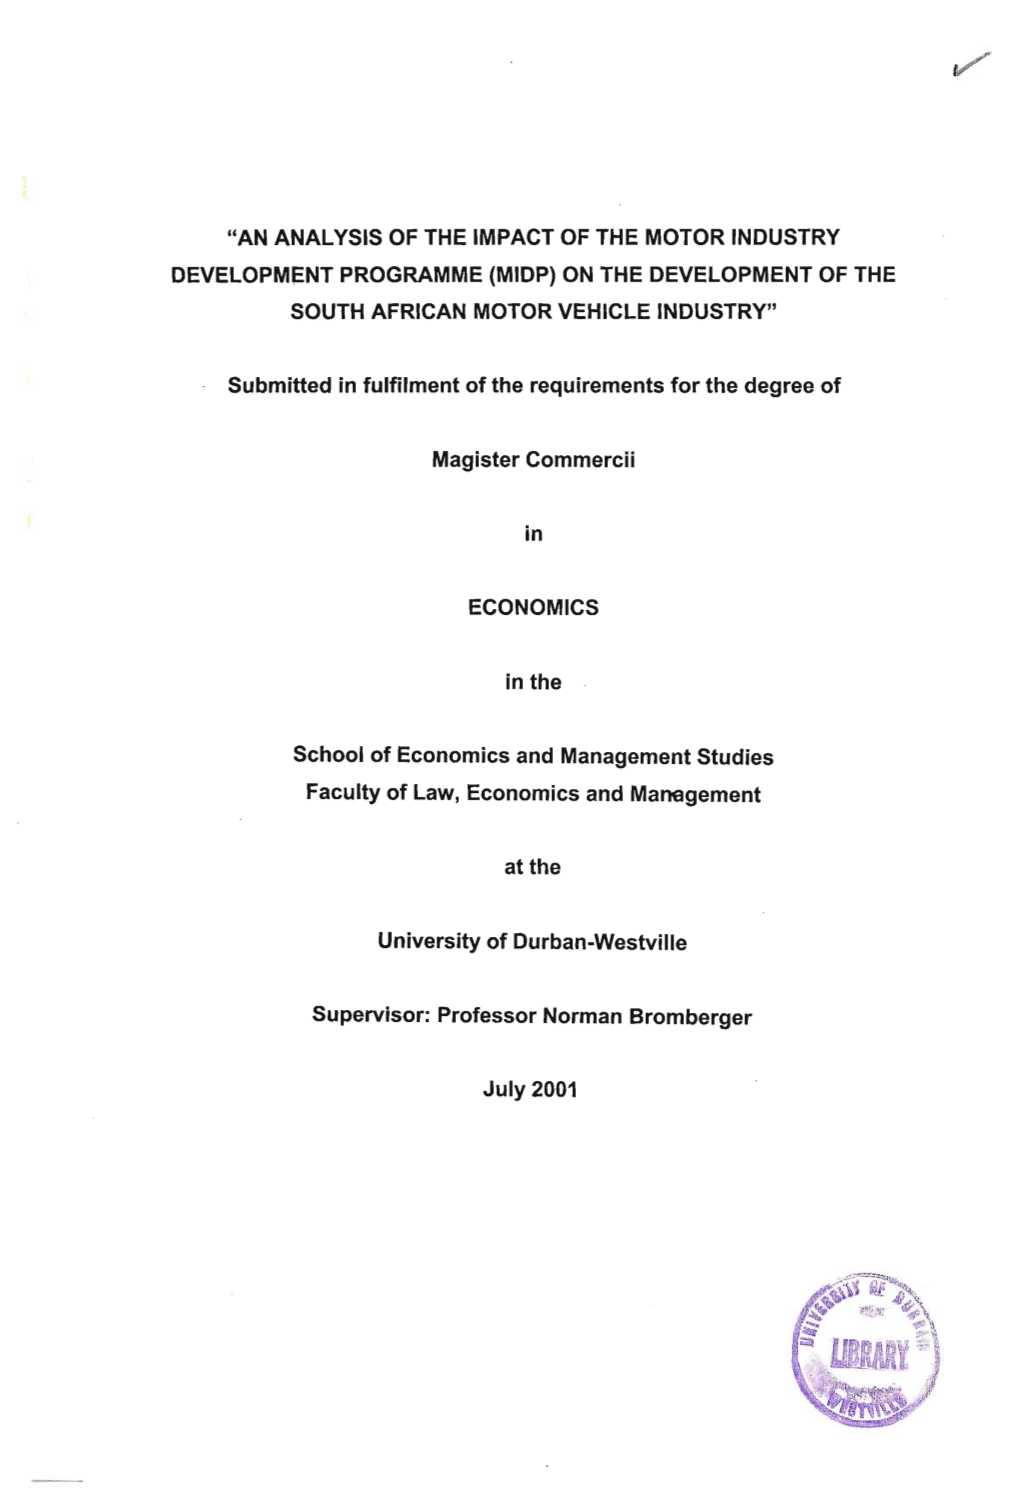 "An Analysis of the Impact of the Motor Industry Developm~Nt Programme (Midp) on the Development of the South African Motor Vehicle Industry"